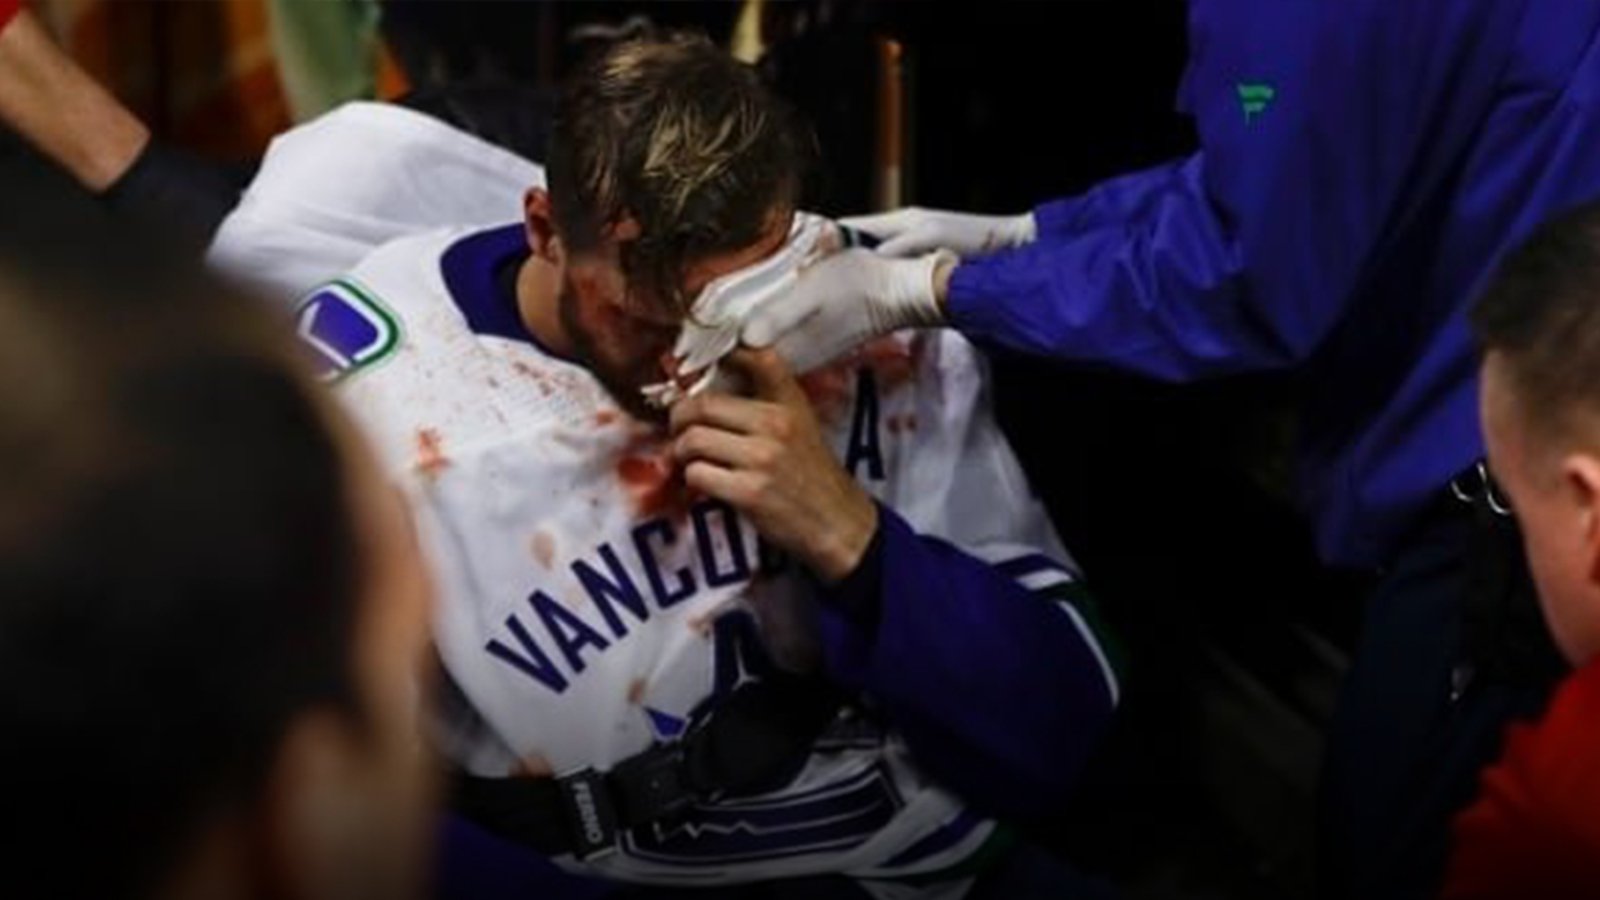 Outpouring of support for Canucks veteran Edler after terrifying injury in Philly last night